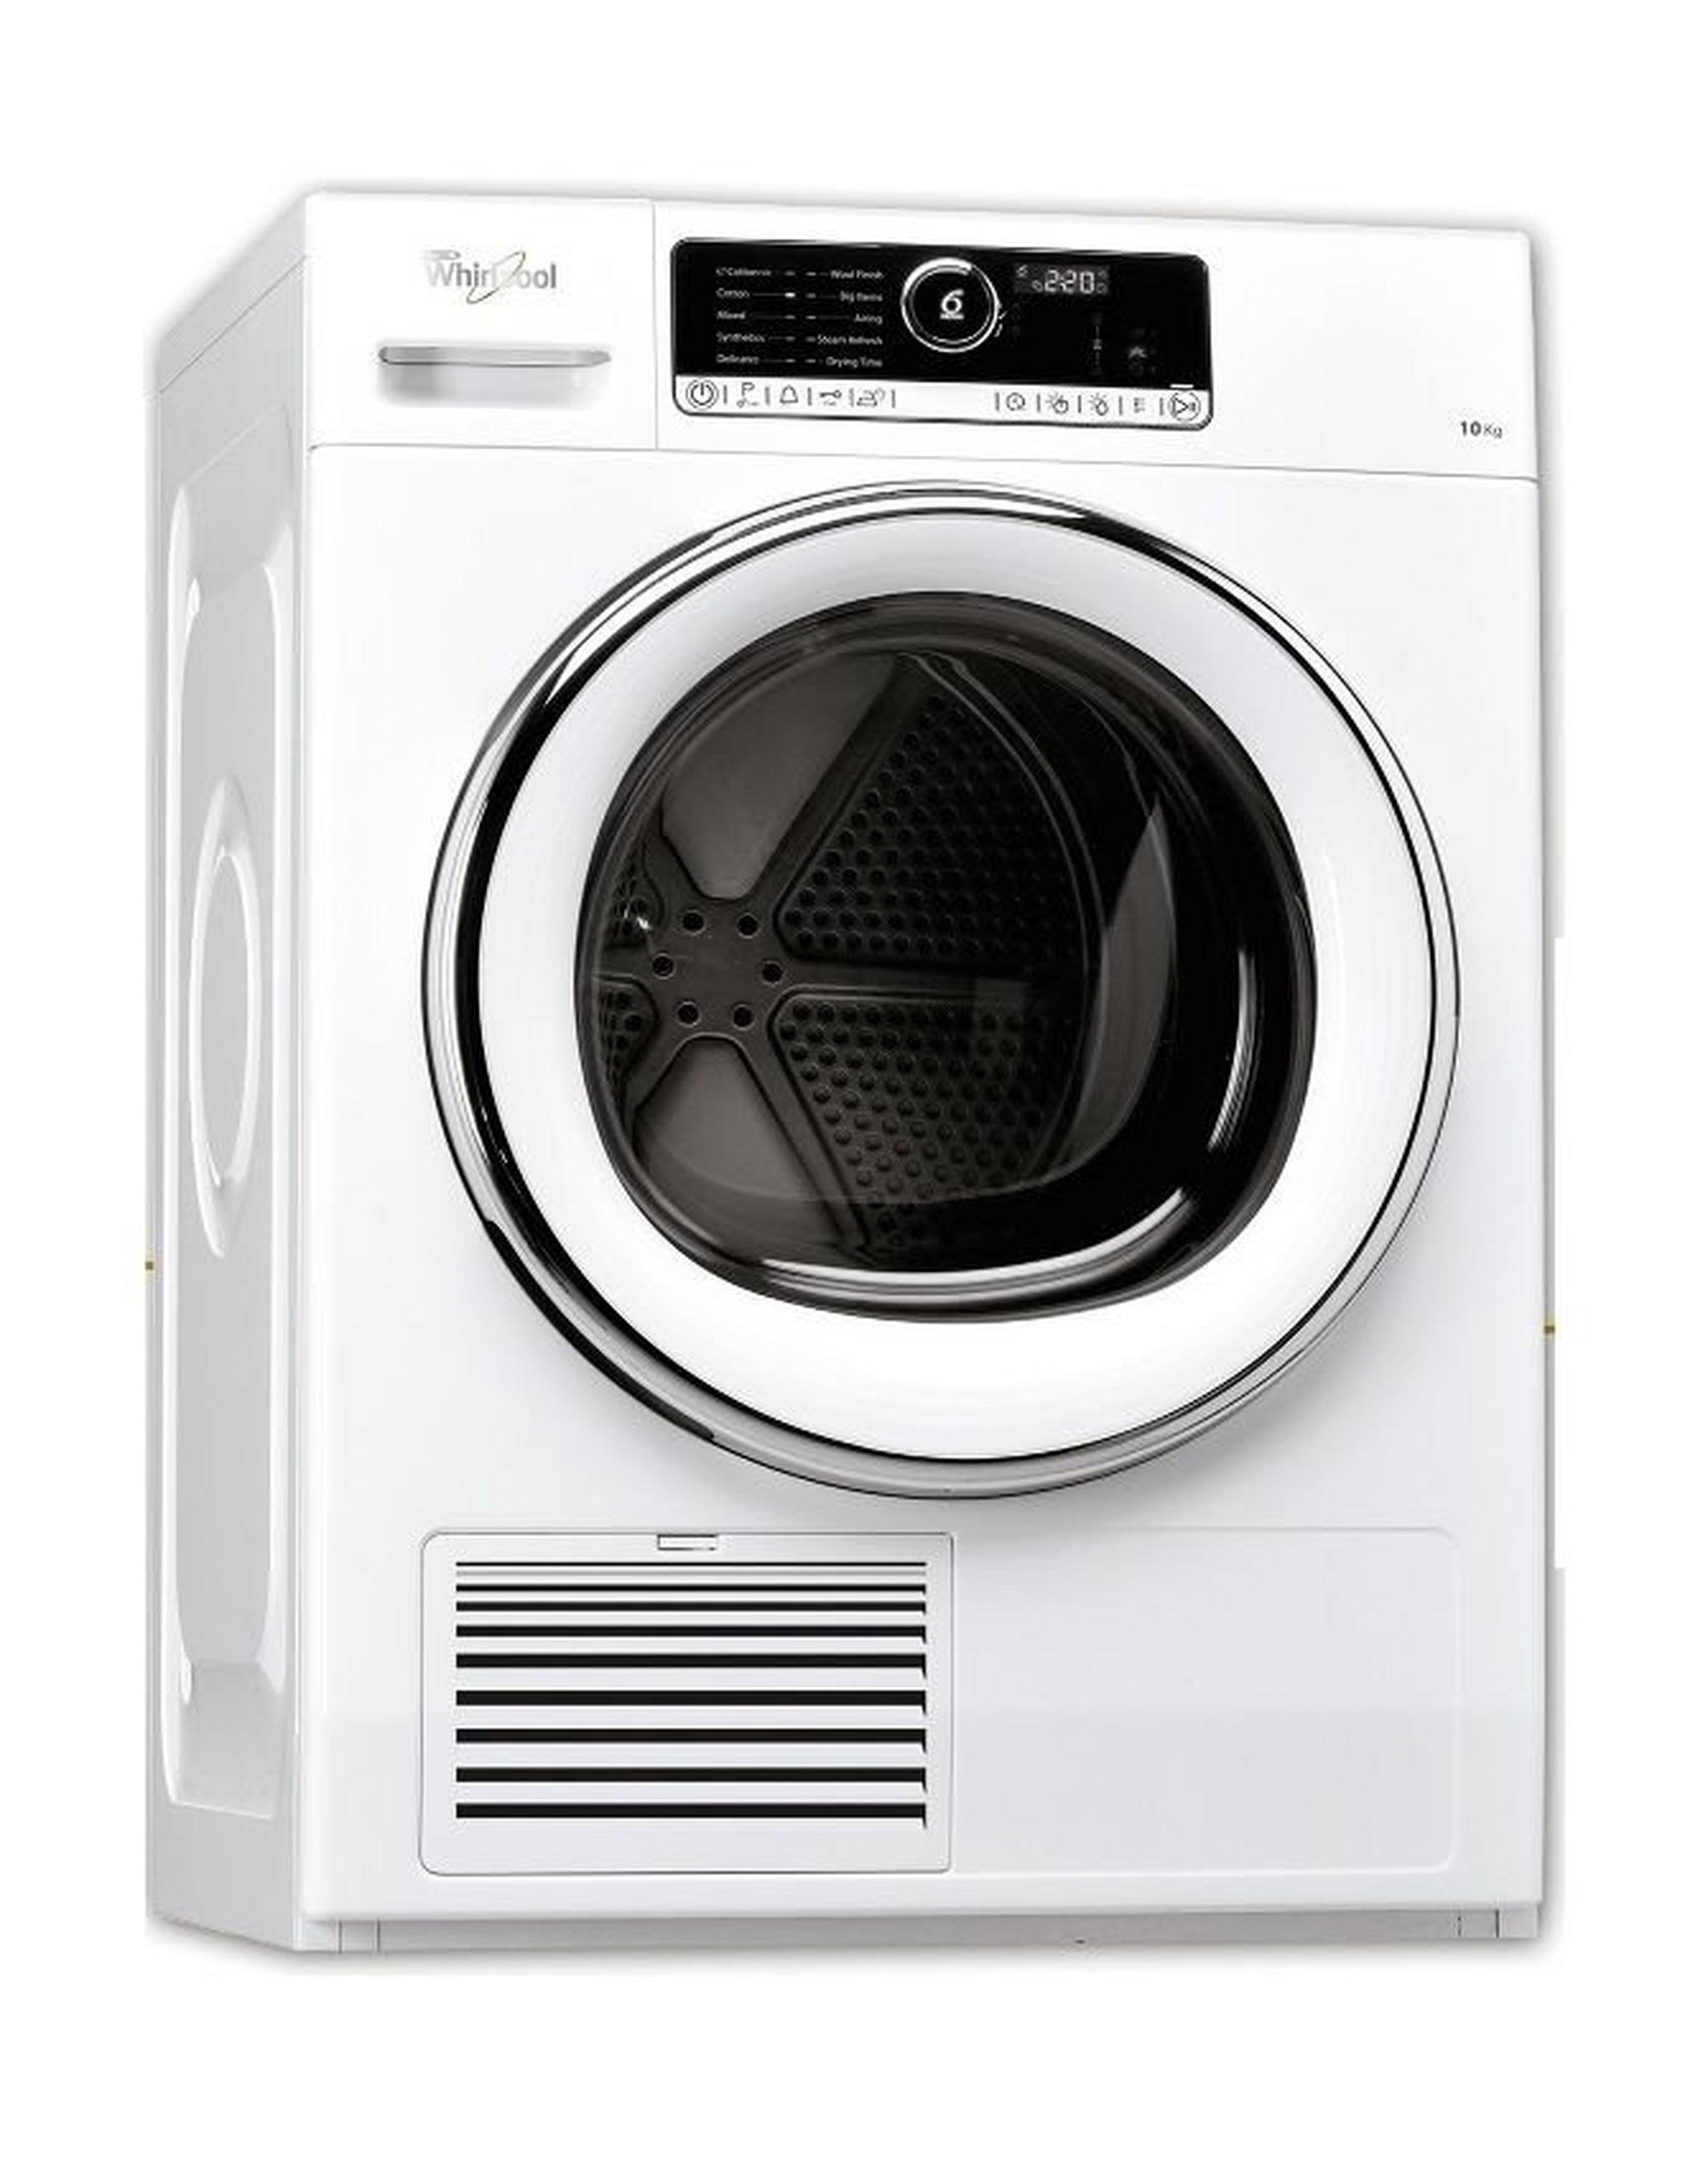 Whirlpool 10kg 11 Programs Dryer Condenser (RC8066A1F) – White